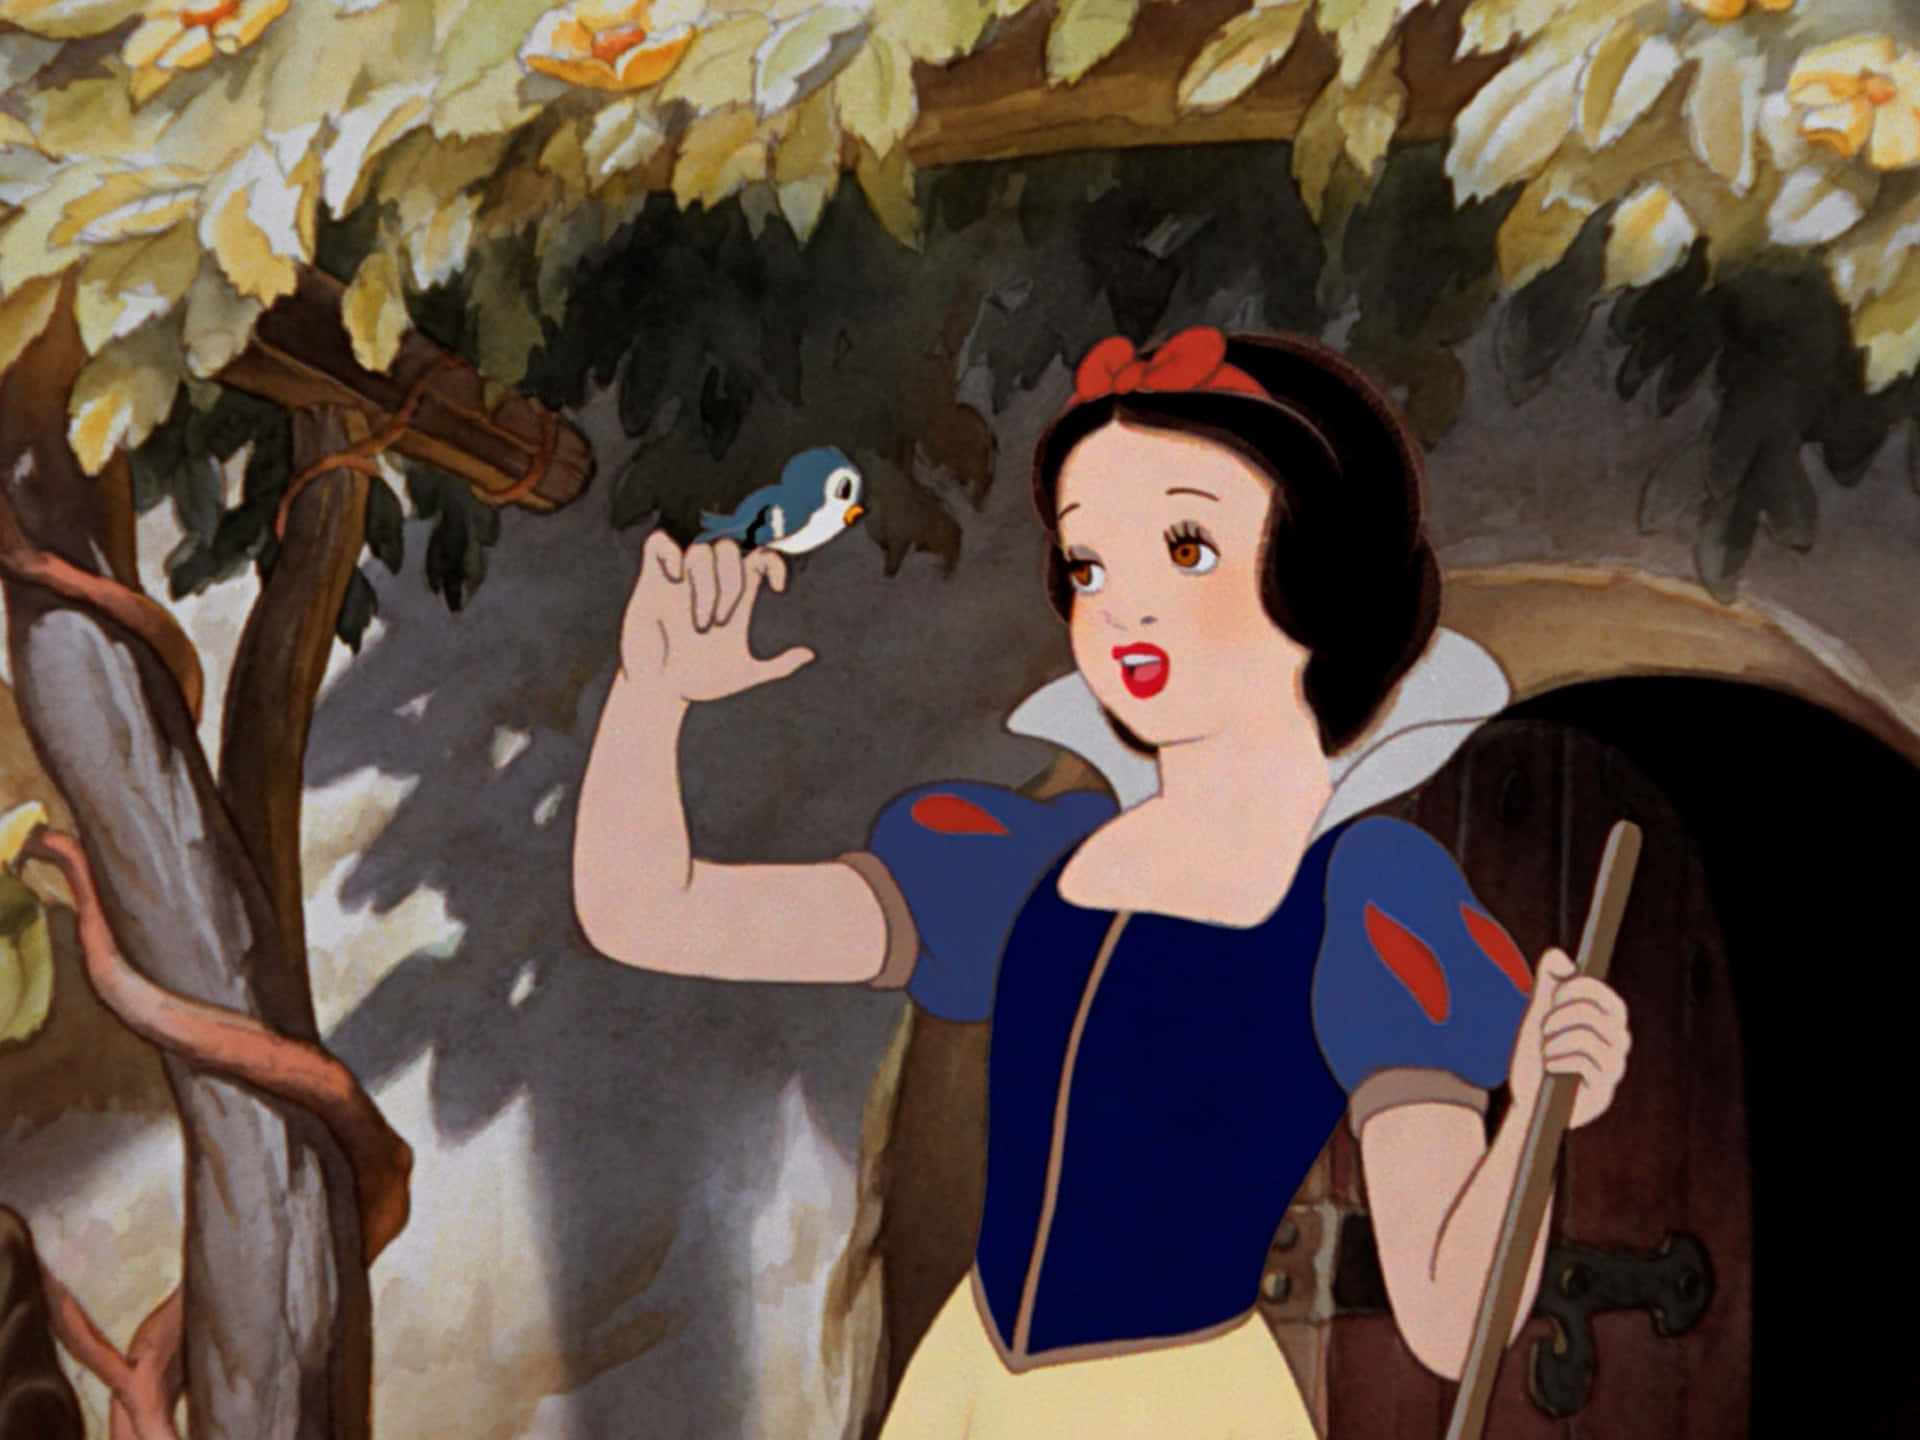 Snow White - A fairy tale of courage, friendship, and true love